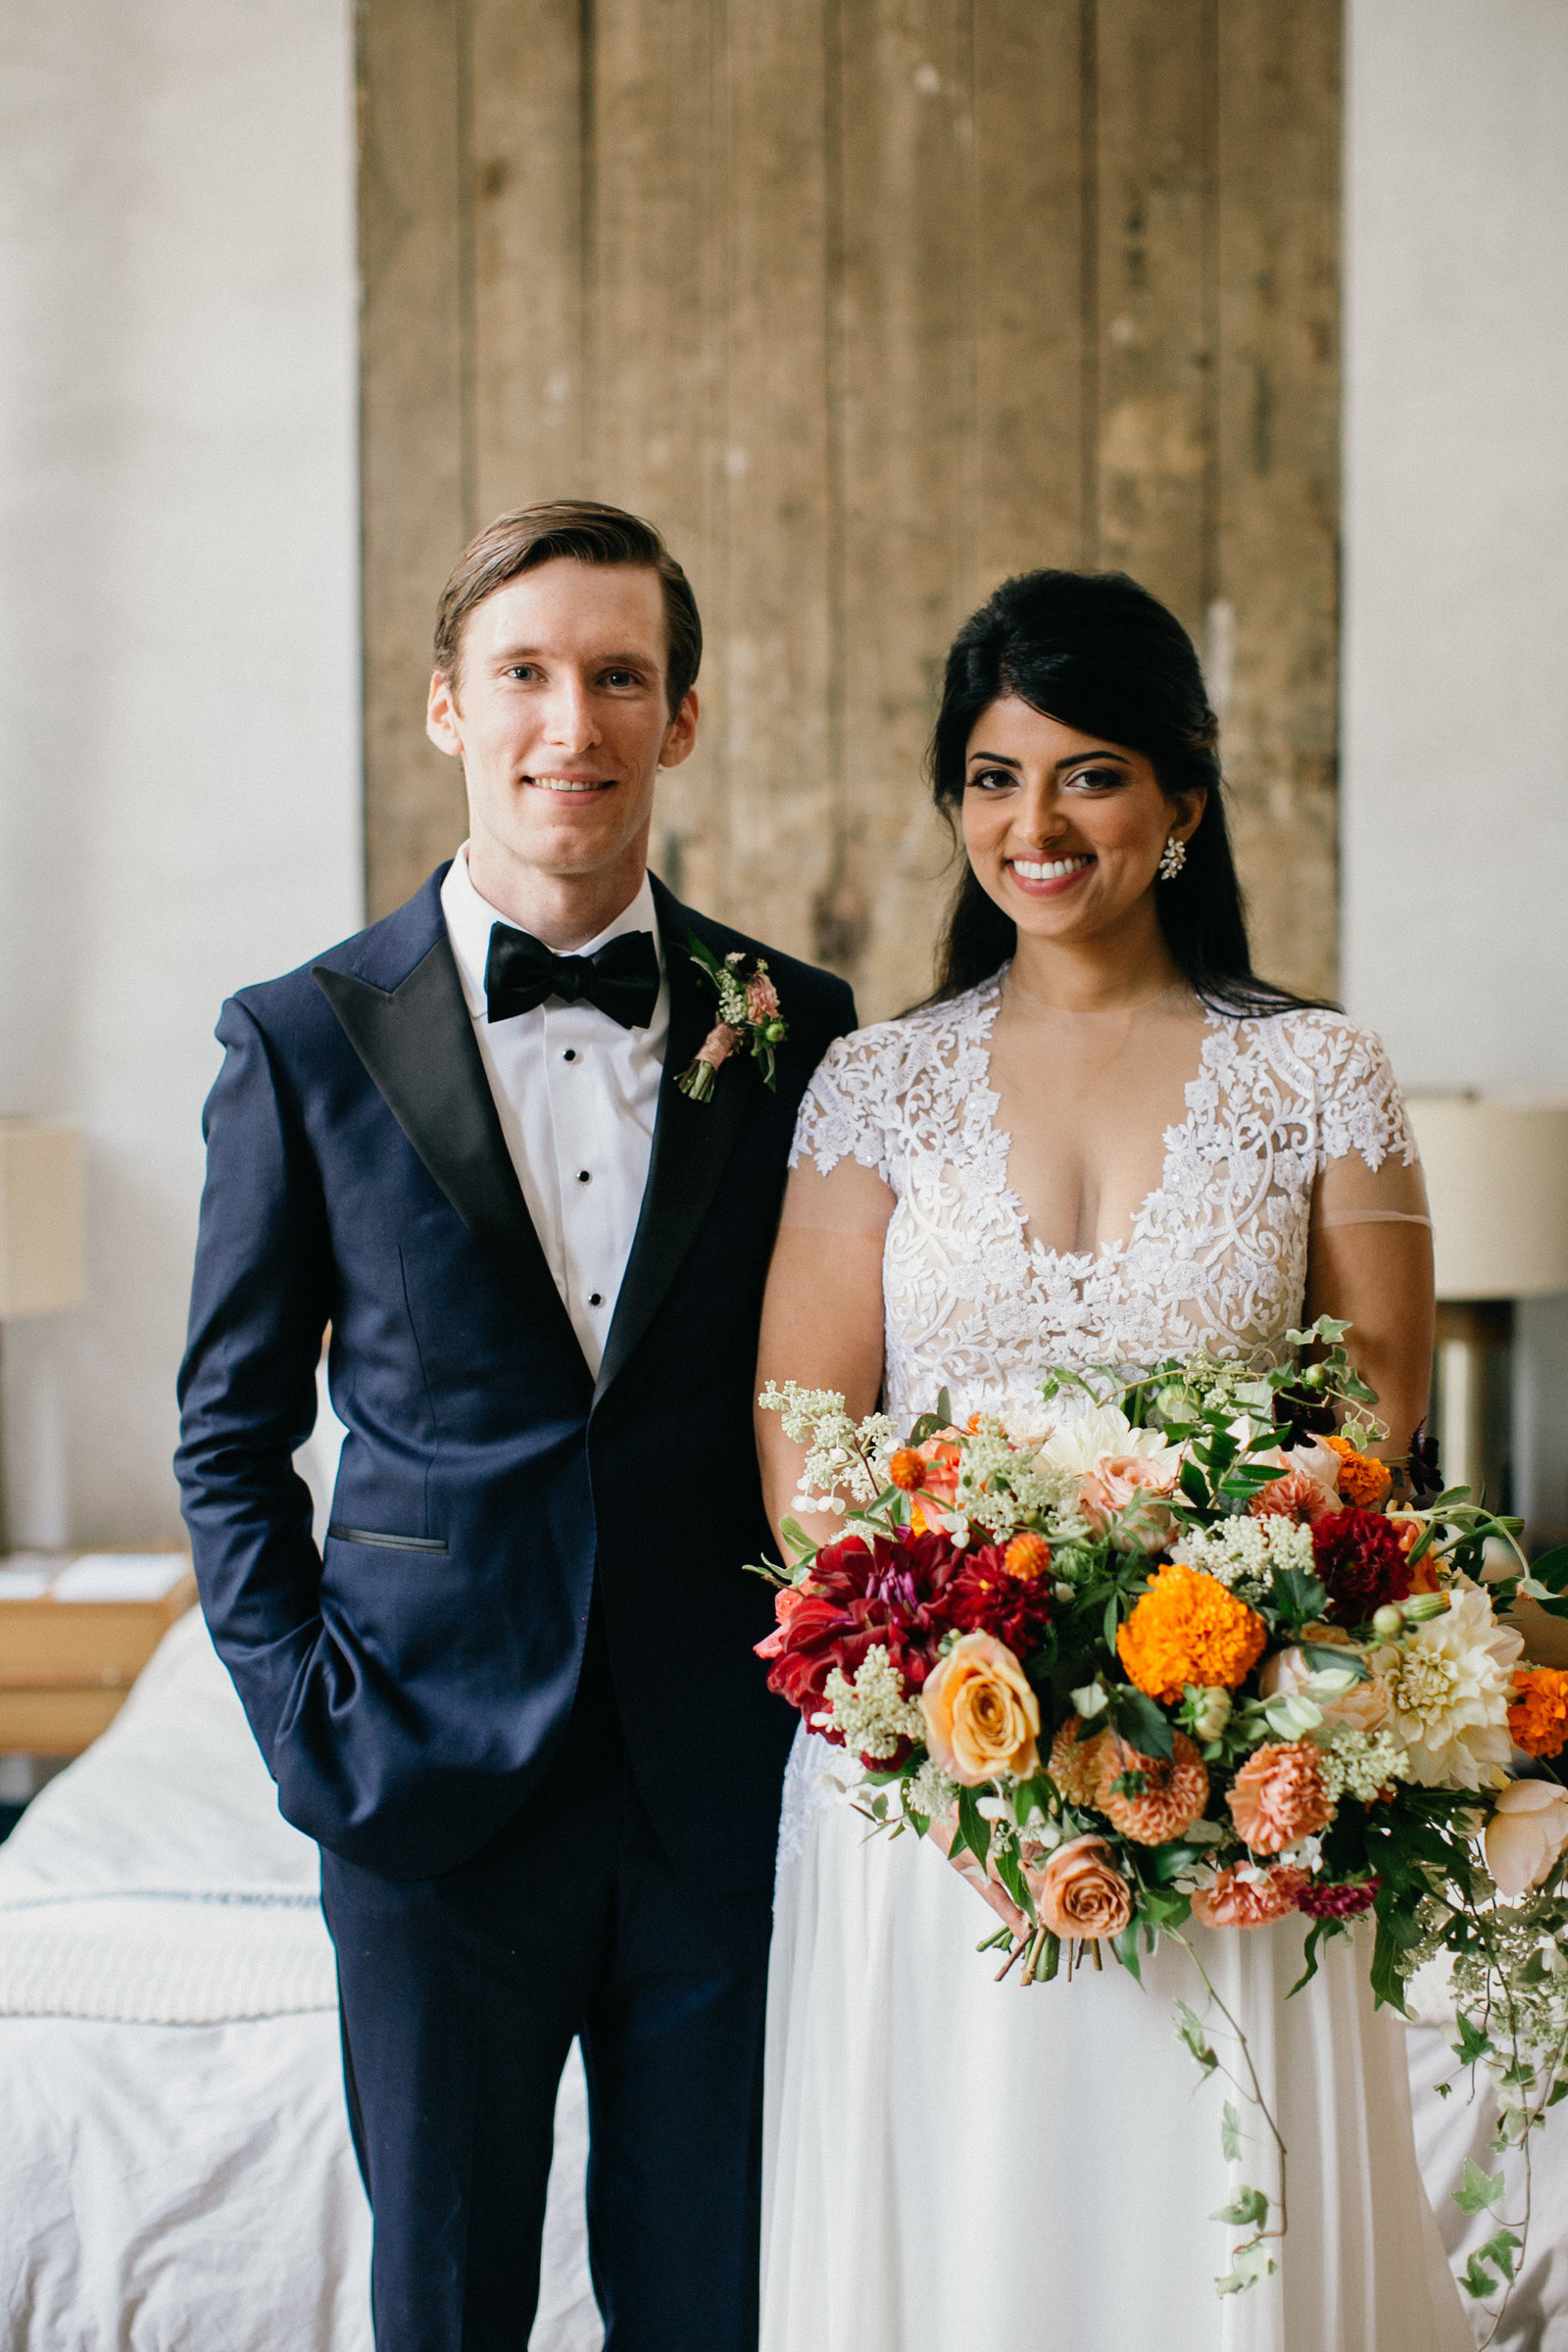 Gorgeous couple, photographed by Sweetwater at this unique Philadelphia wedding venue.